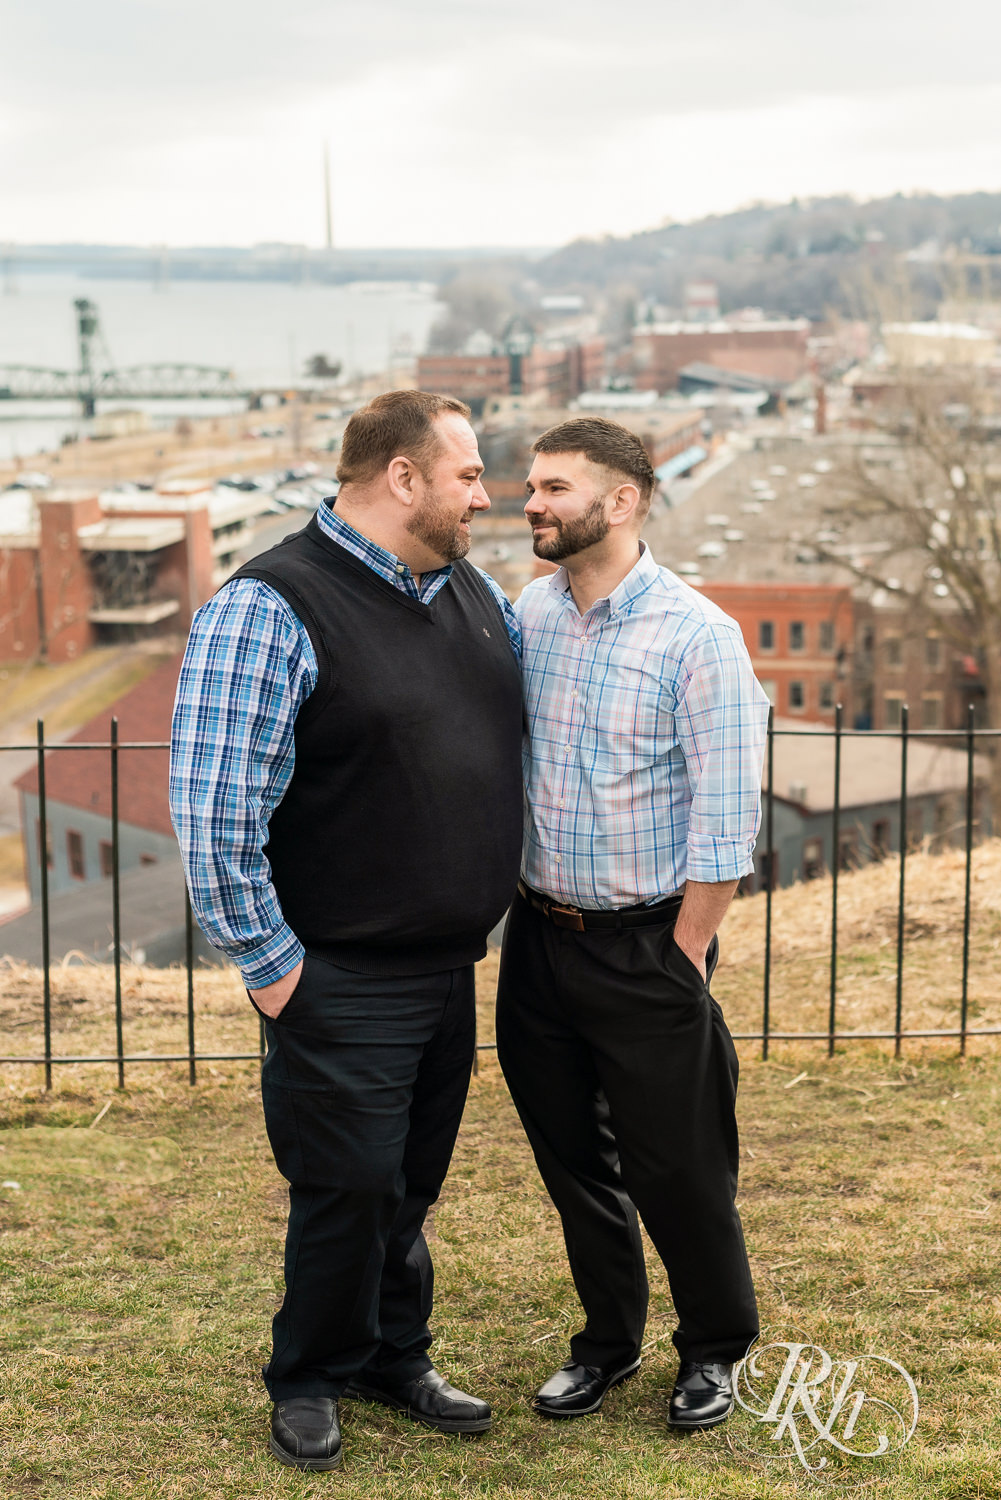 Two men in plaid shirts smile at each other during engagement photography in Stillwater, Minnesota.